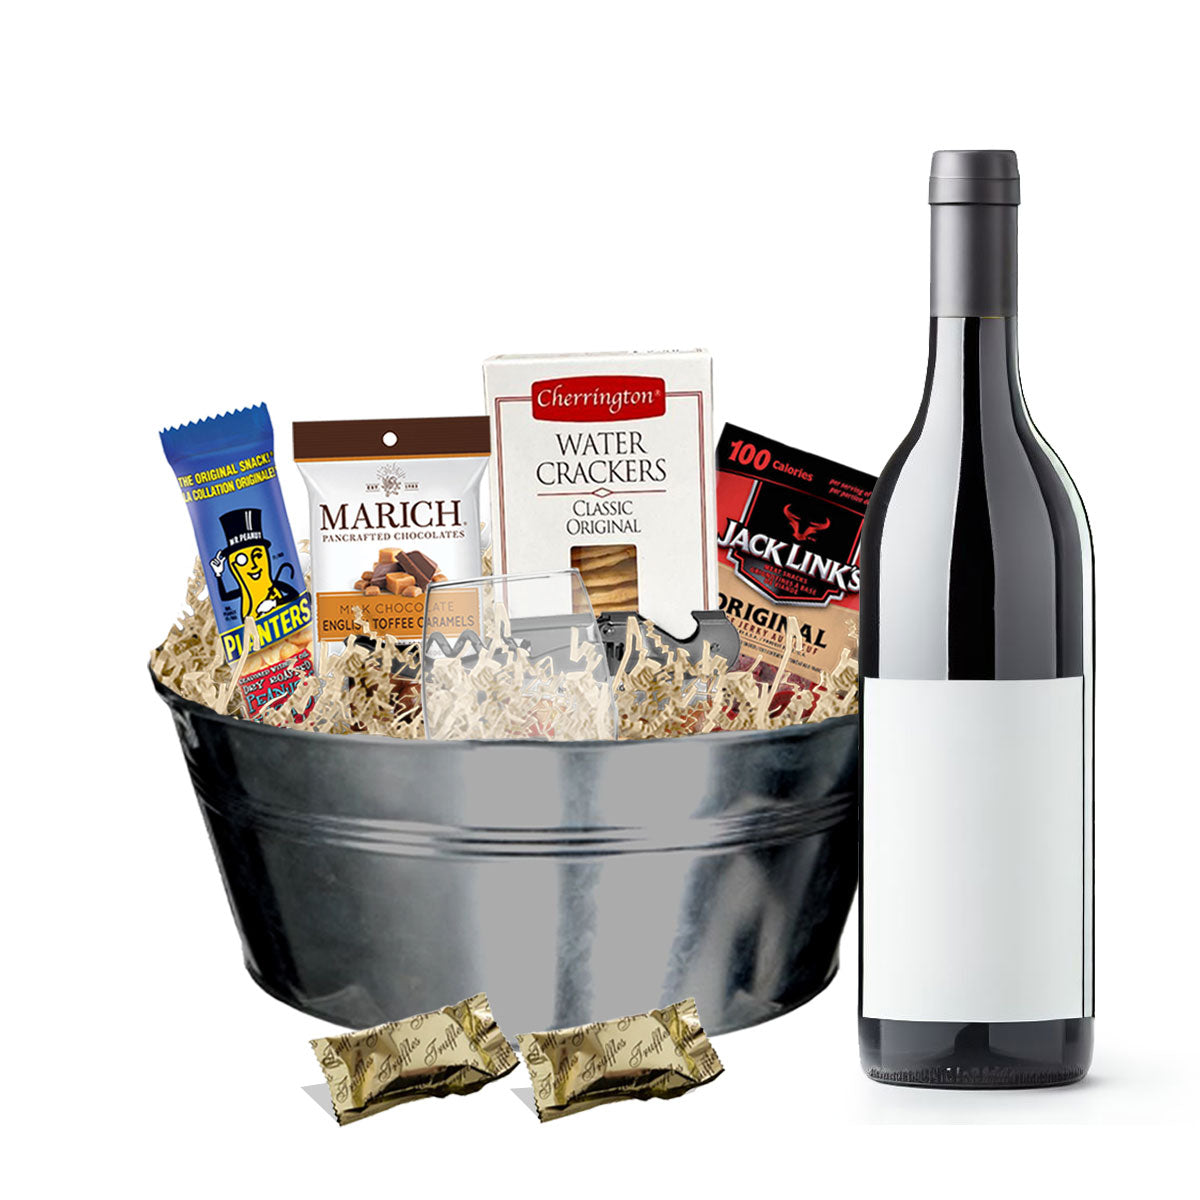 TAG Liquor Stores BC - 7 Deadly Cab 750ml Gift Basket-wine